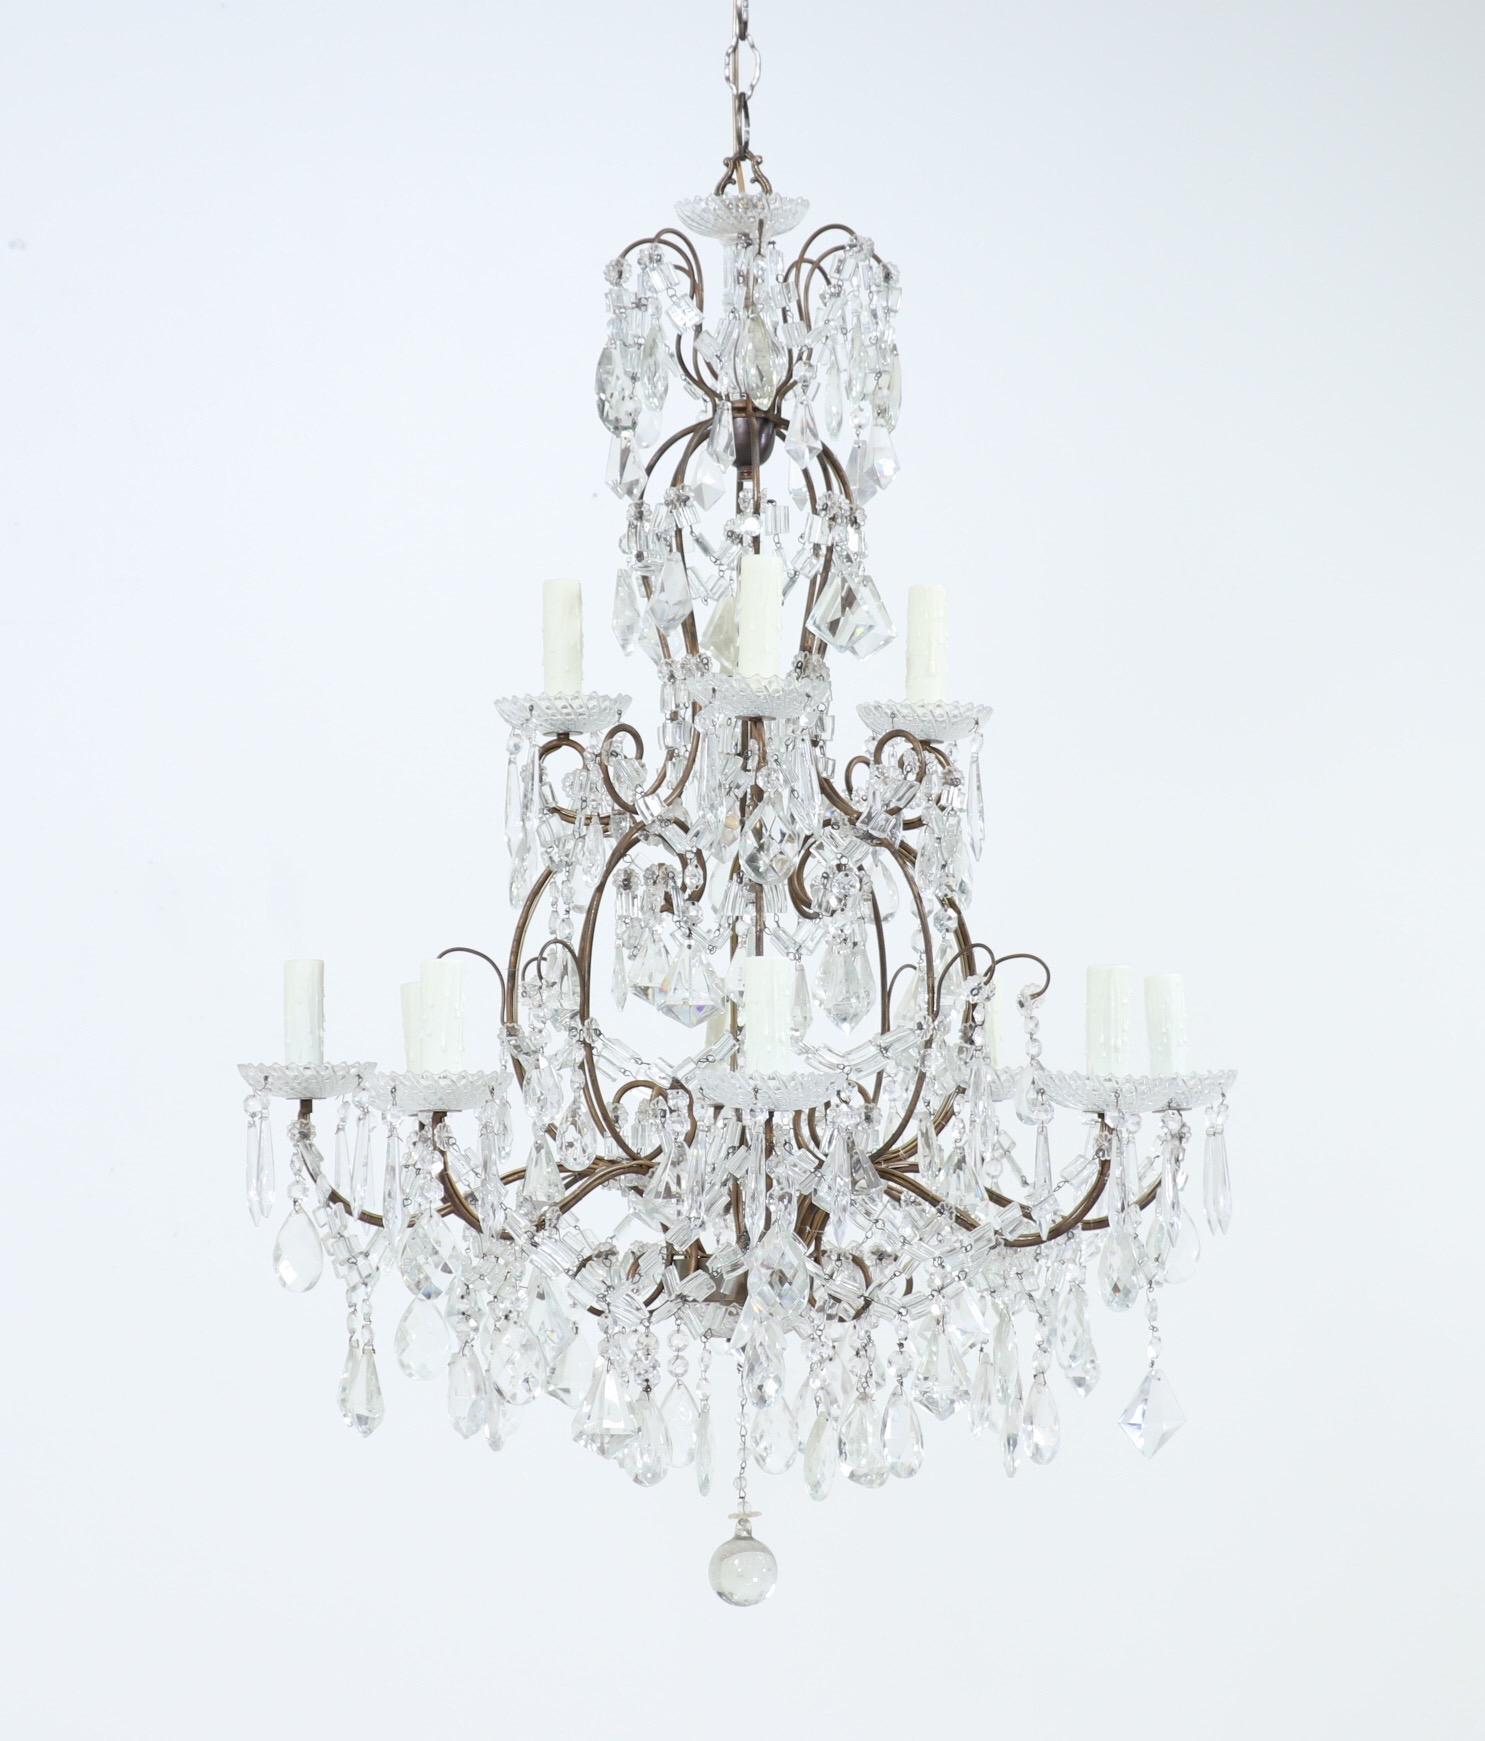 Glamorous, 1940s Italian gilt-iron and crystal two-tier chandelier.

The chandelier features a shapely, scrolled wrought iron frame with gilt paint finish and an abundance of crystal decorations. 

The chandelier is wired and in working condition,